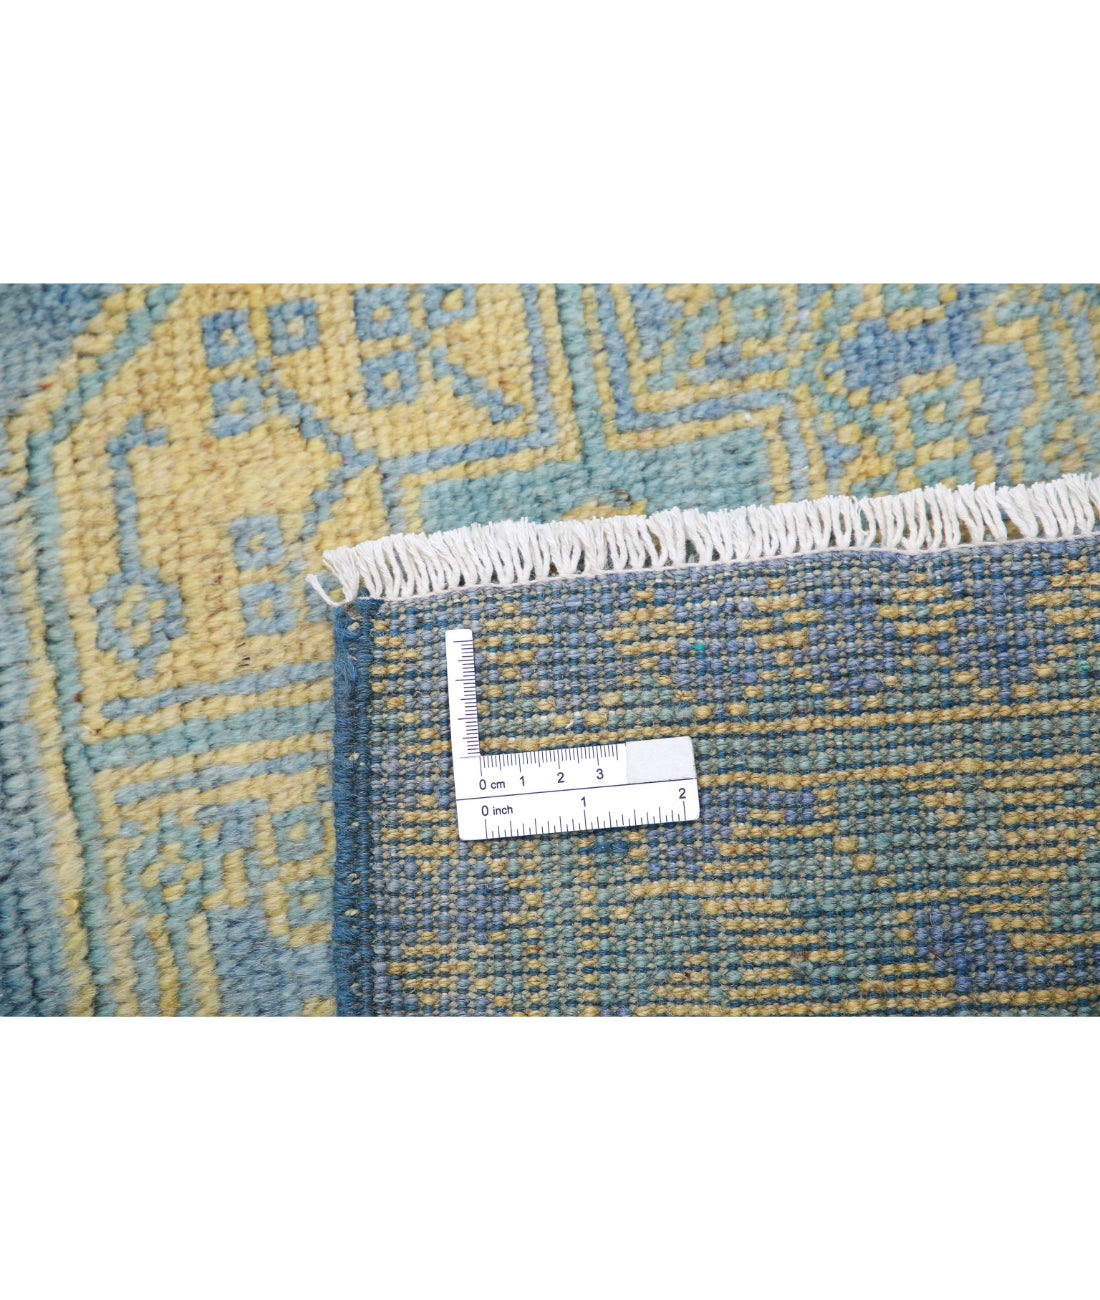 Revival 3'5'' X 4'8'' Hand-Knotted Wool Rug 3'5'' x 4'8'' (103 X 140) / Blue / Gold